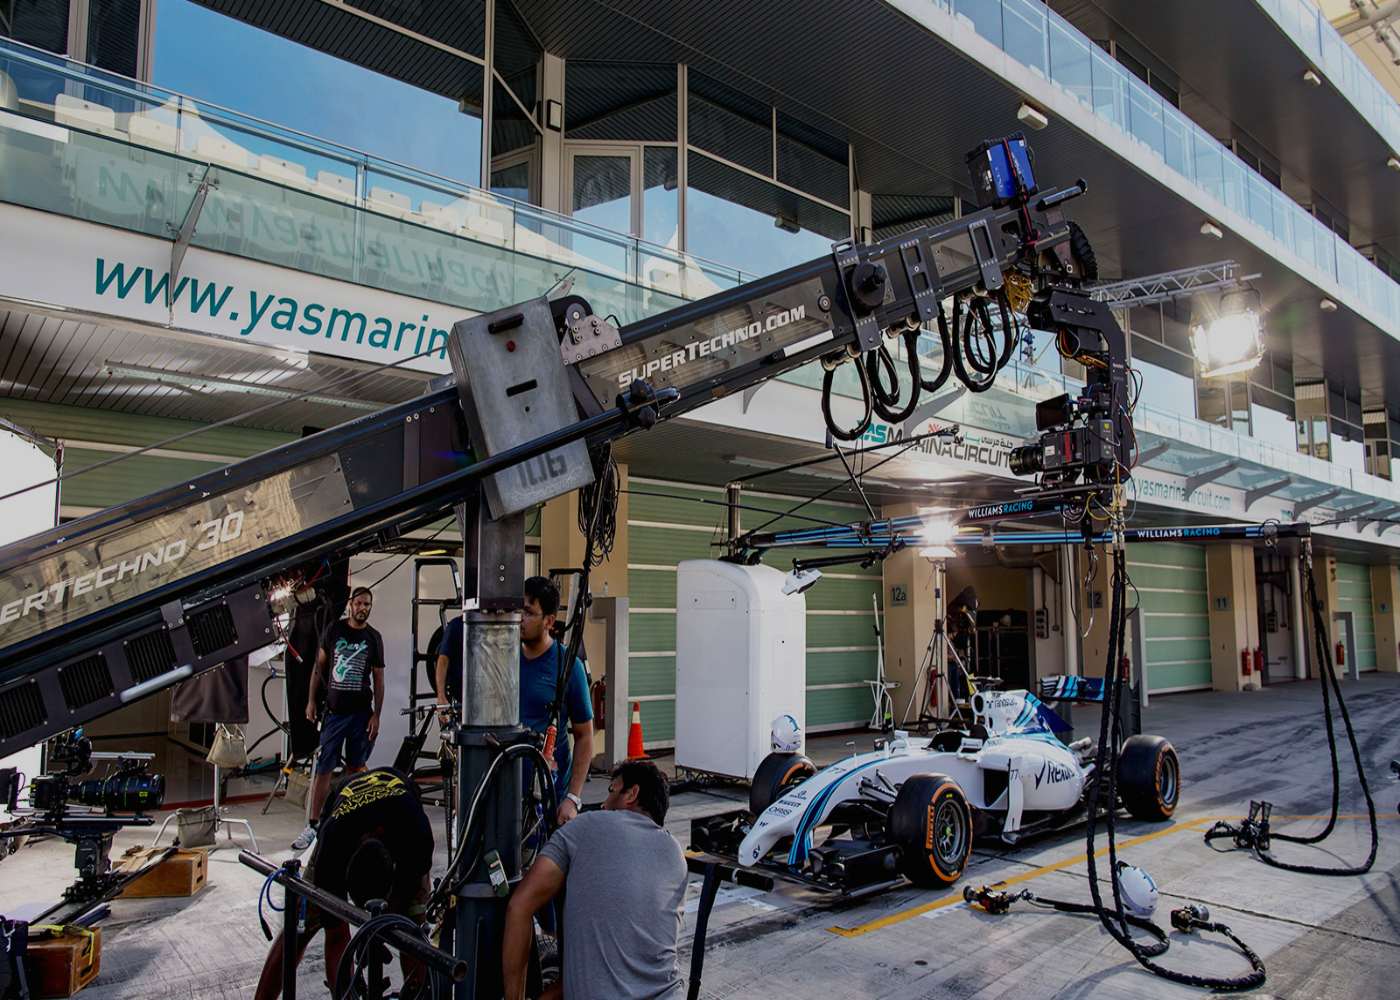 Solution to Problems Film Production Companies in Dubai Face